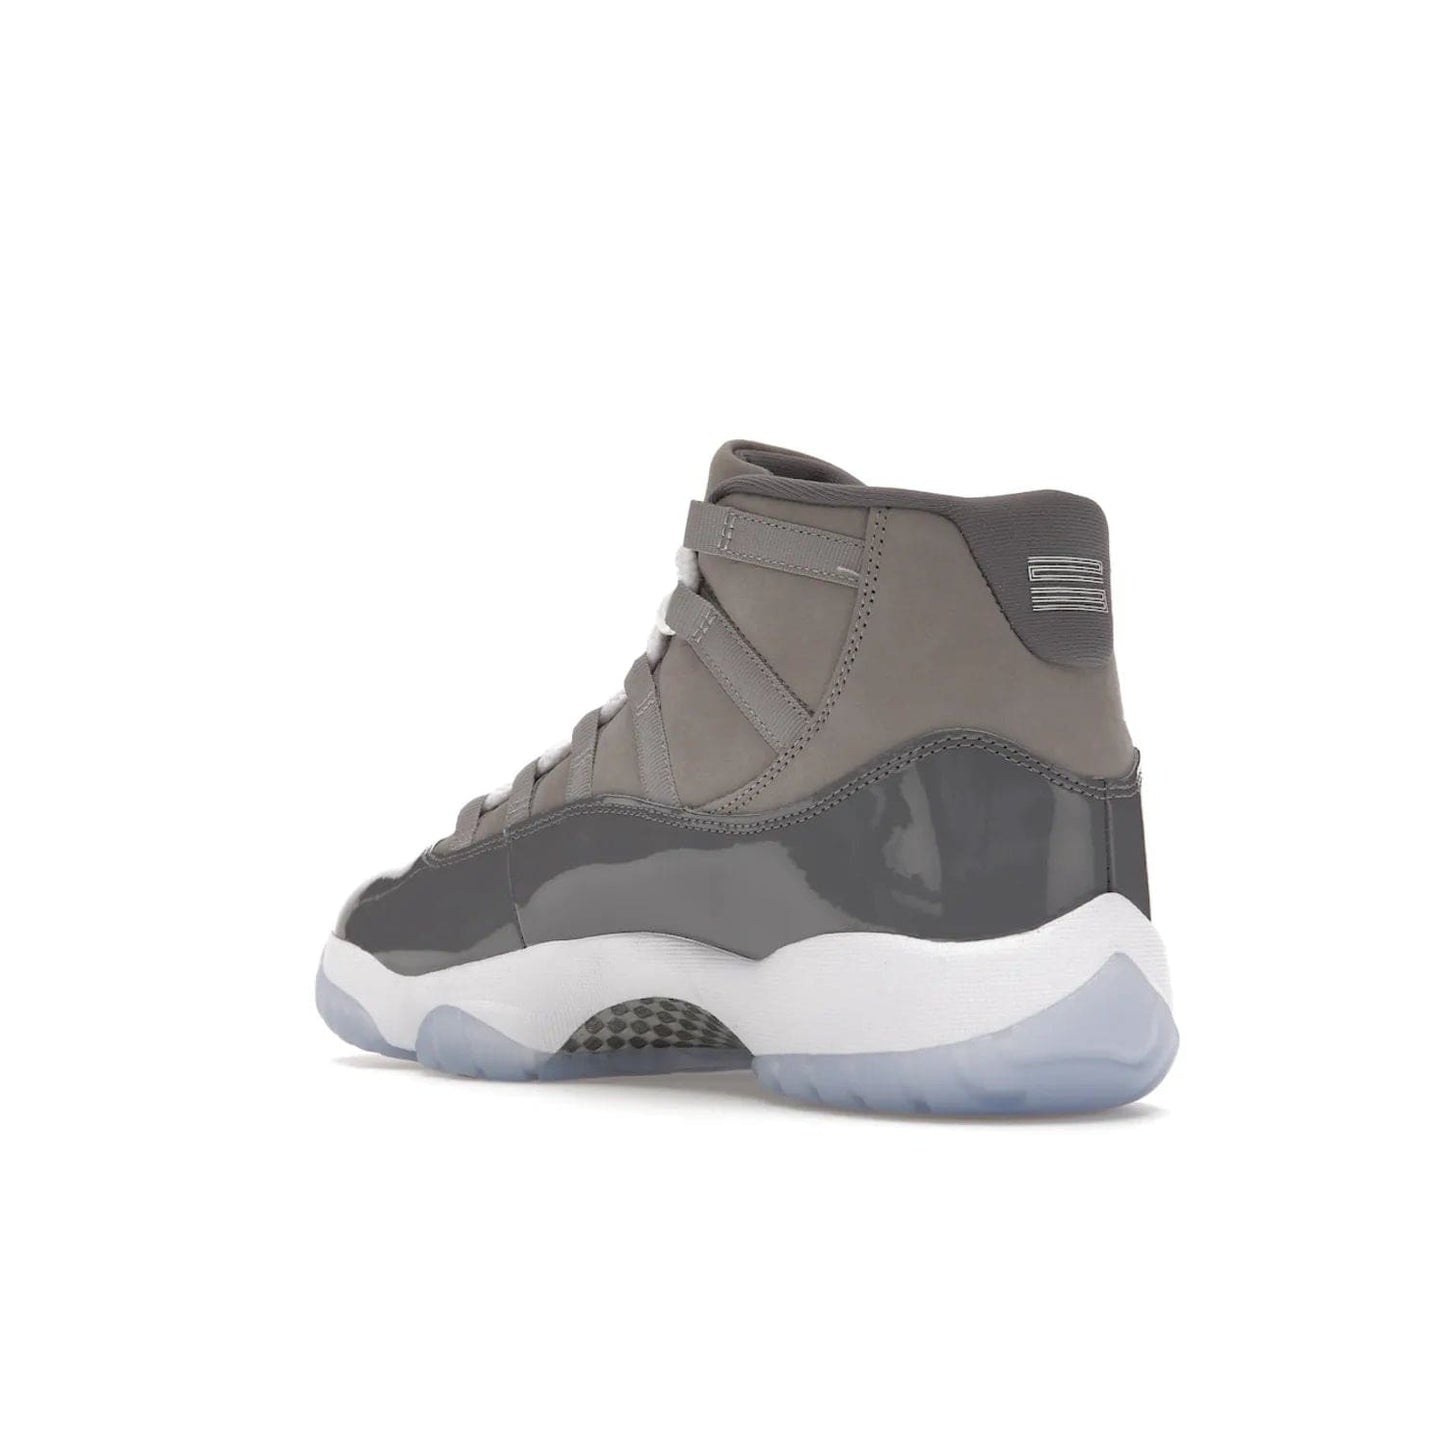 Jordan 11 Retro Cool Grey (2021) - Image 24 - Only at www.BallersClubKickz.com - Shop the Air Jordan 11 Retro Cool Grey (2021) for a must-have sneaker with a Cool Grey Durabuck upper, patent leather overlays, signature Jumpman embroidery, a white midsole, icy blue translucent outsole, and Multi-Color accents.  Released in December 2021 for $225.